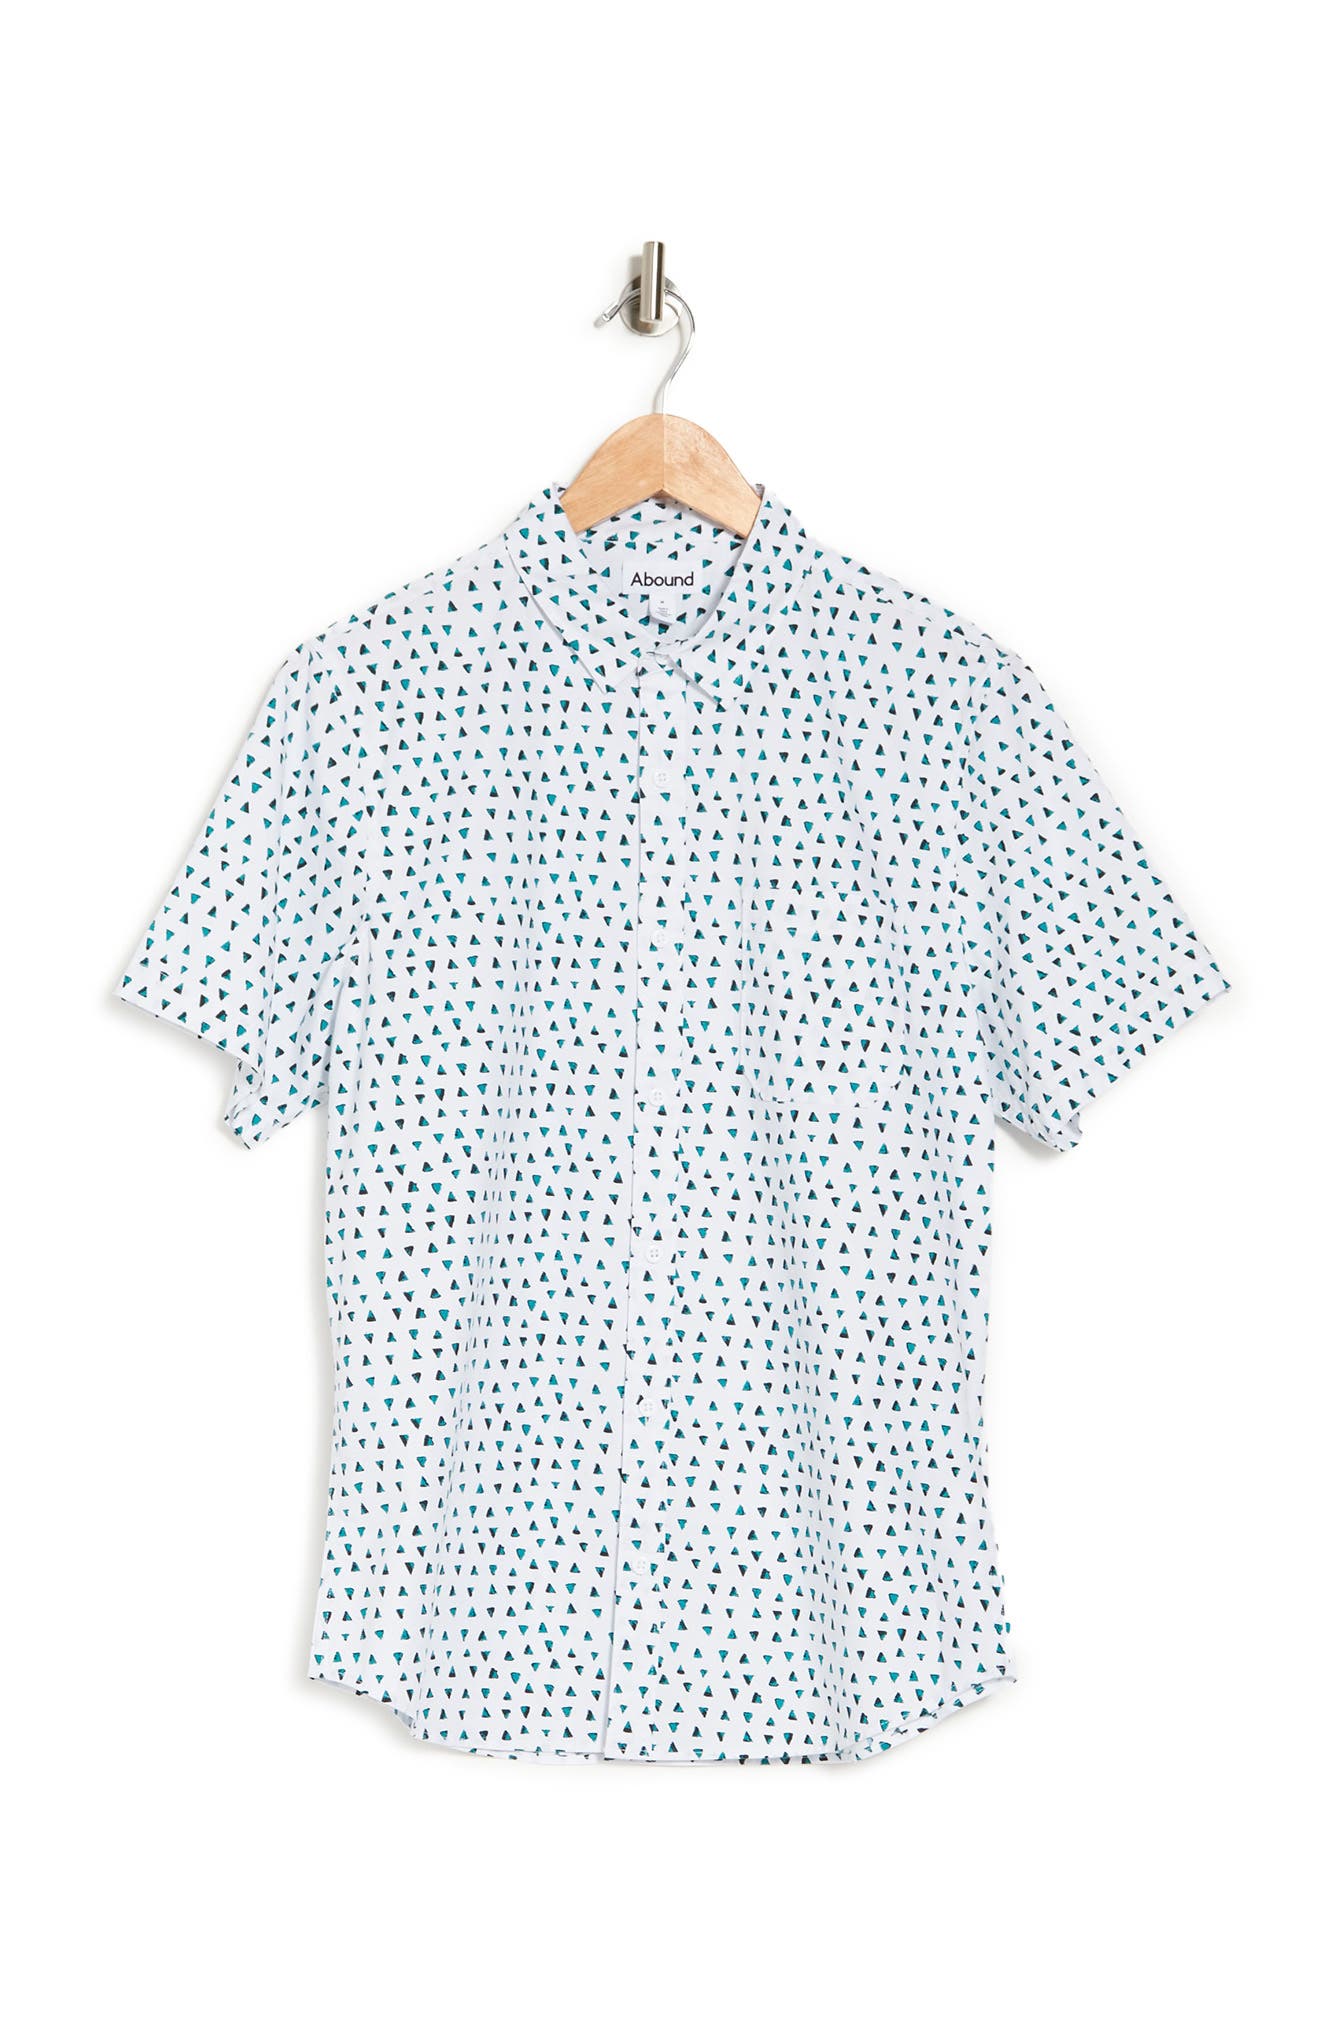 Abound Mini Print Regular Fit Shirt In White Painted Triangles